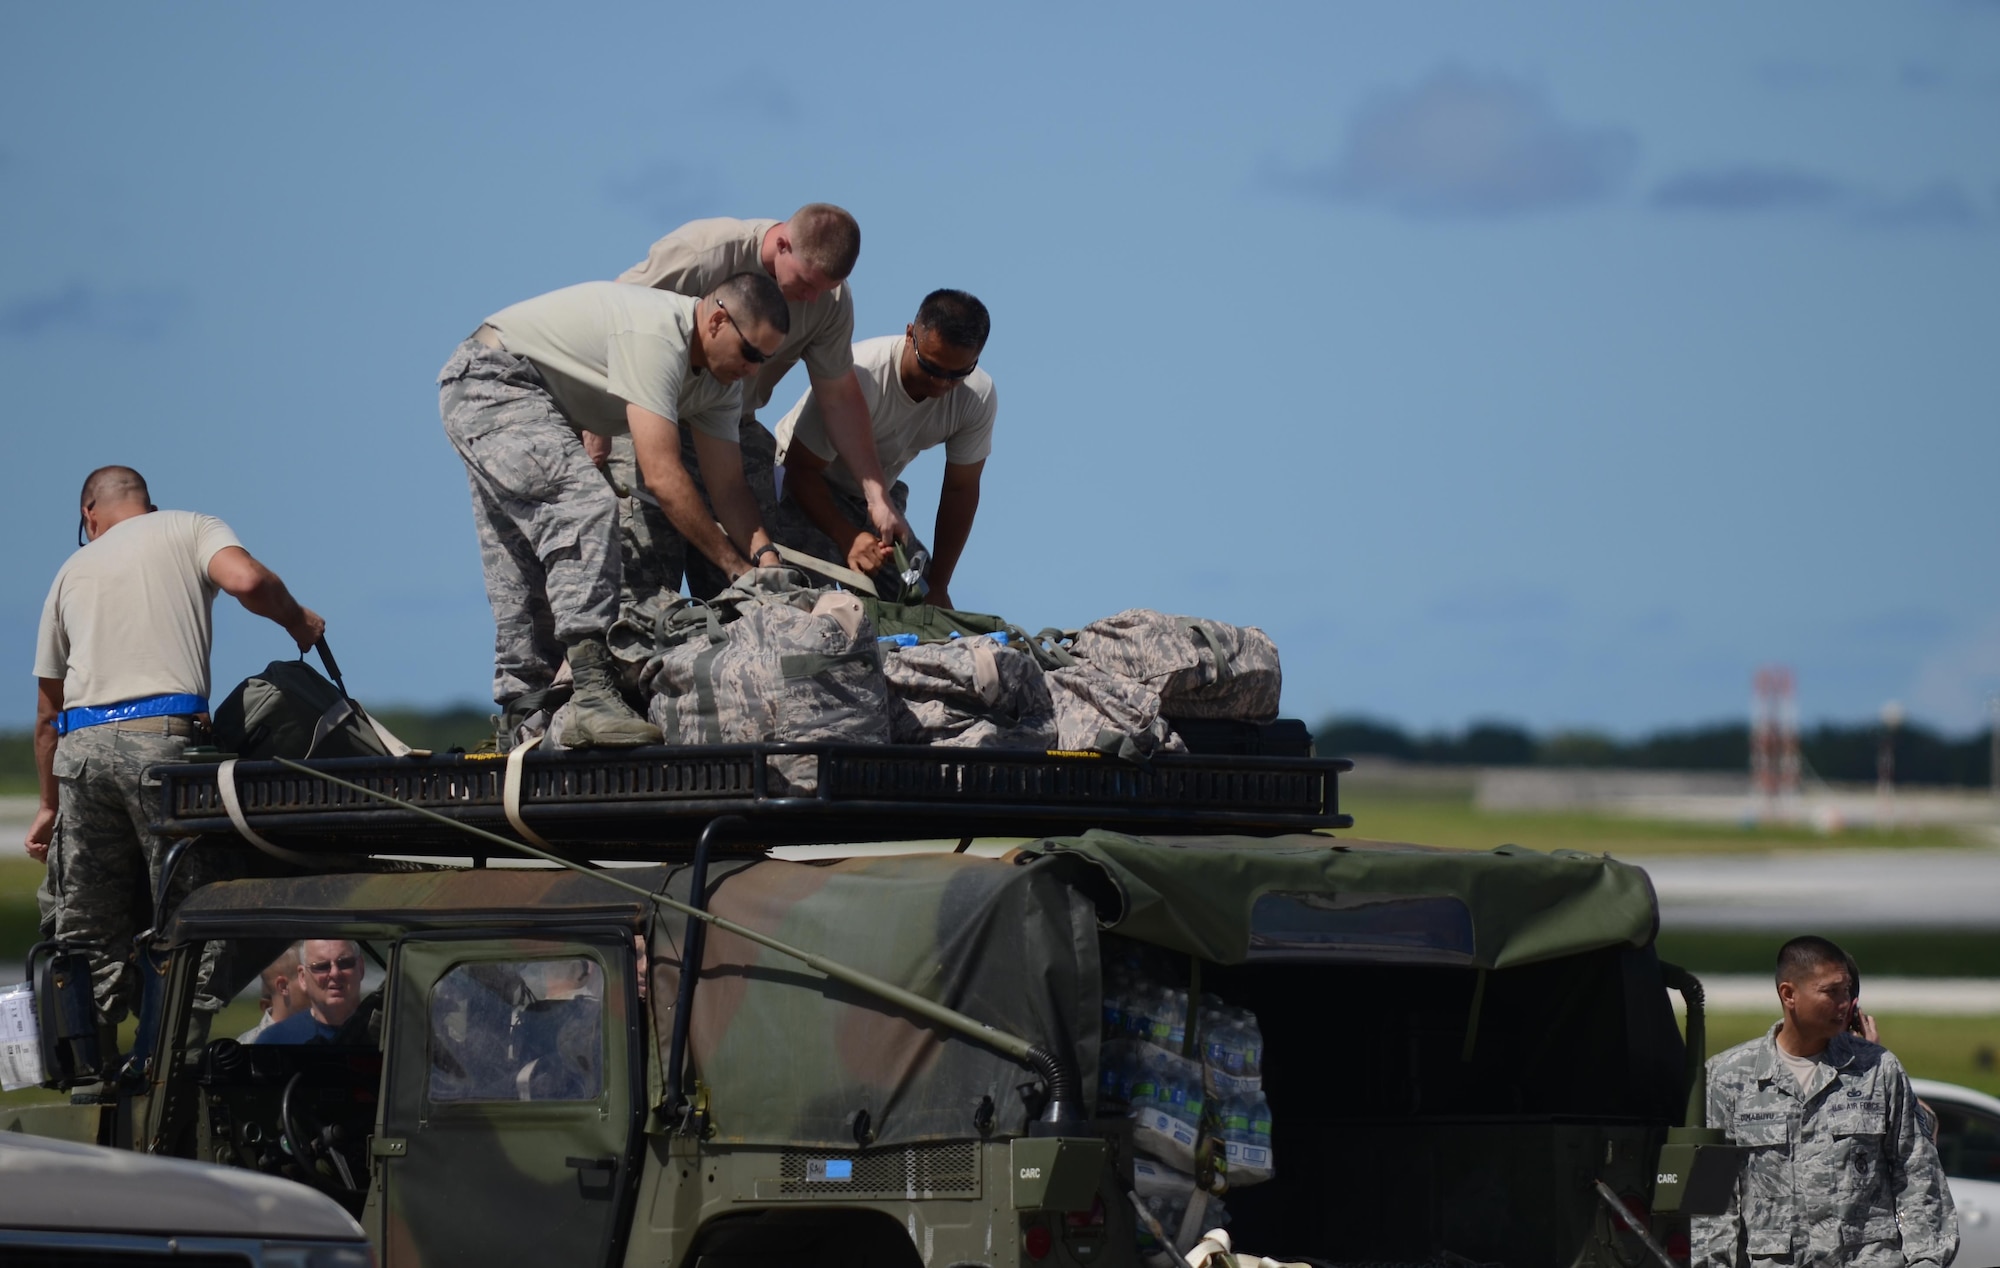 Airmen from the 36th Contingency Response Group secure equipment onto a Humvee Nov. 14, 2013, at Andersen Air Force Base, Guam, before departing to support Operation Damayan in Tacloban, Philippines. The Humvee will be used to access the airfield at Tacloban to determine if it is fit to receive C-17 Globemaster IIIs with supplies and equipment in support of the relief efforts. 